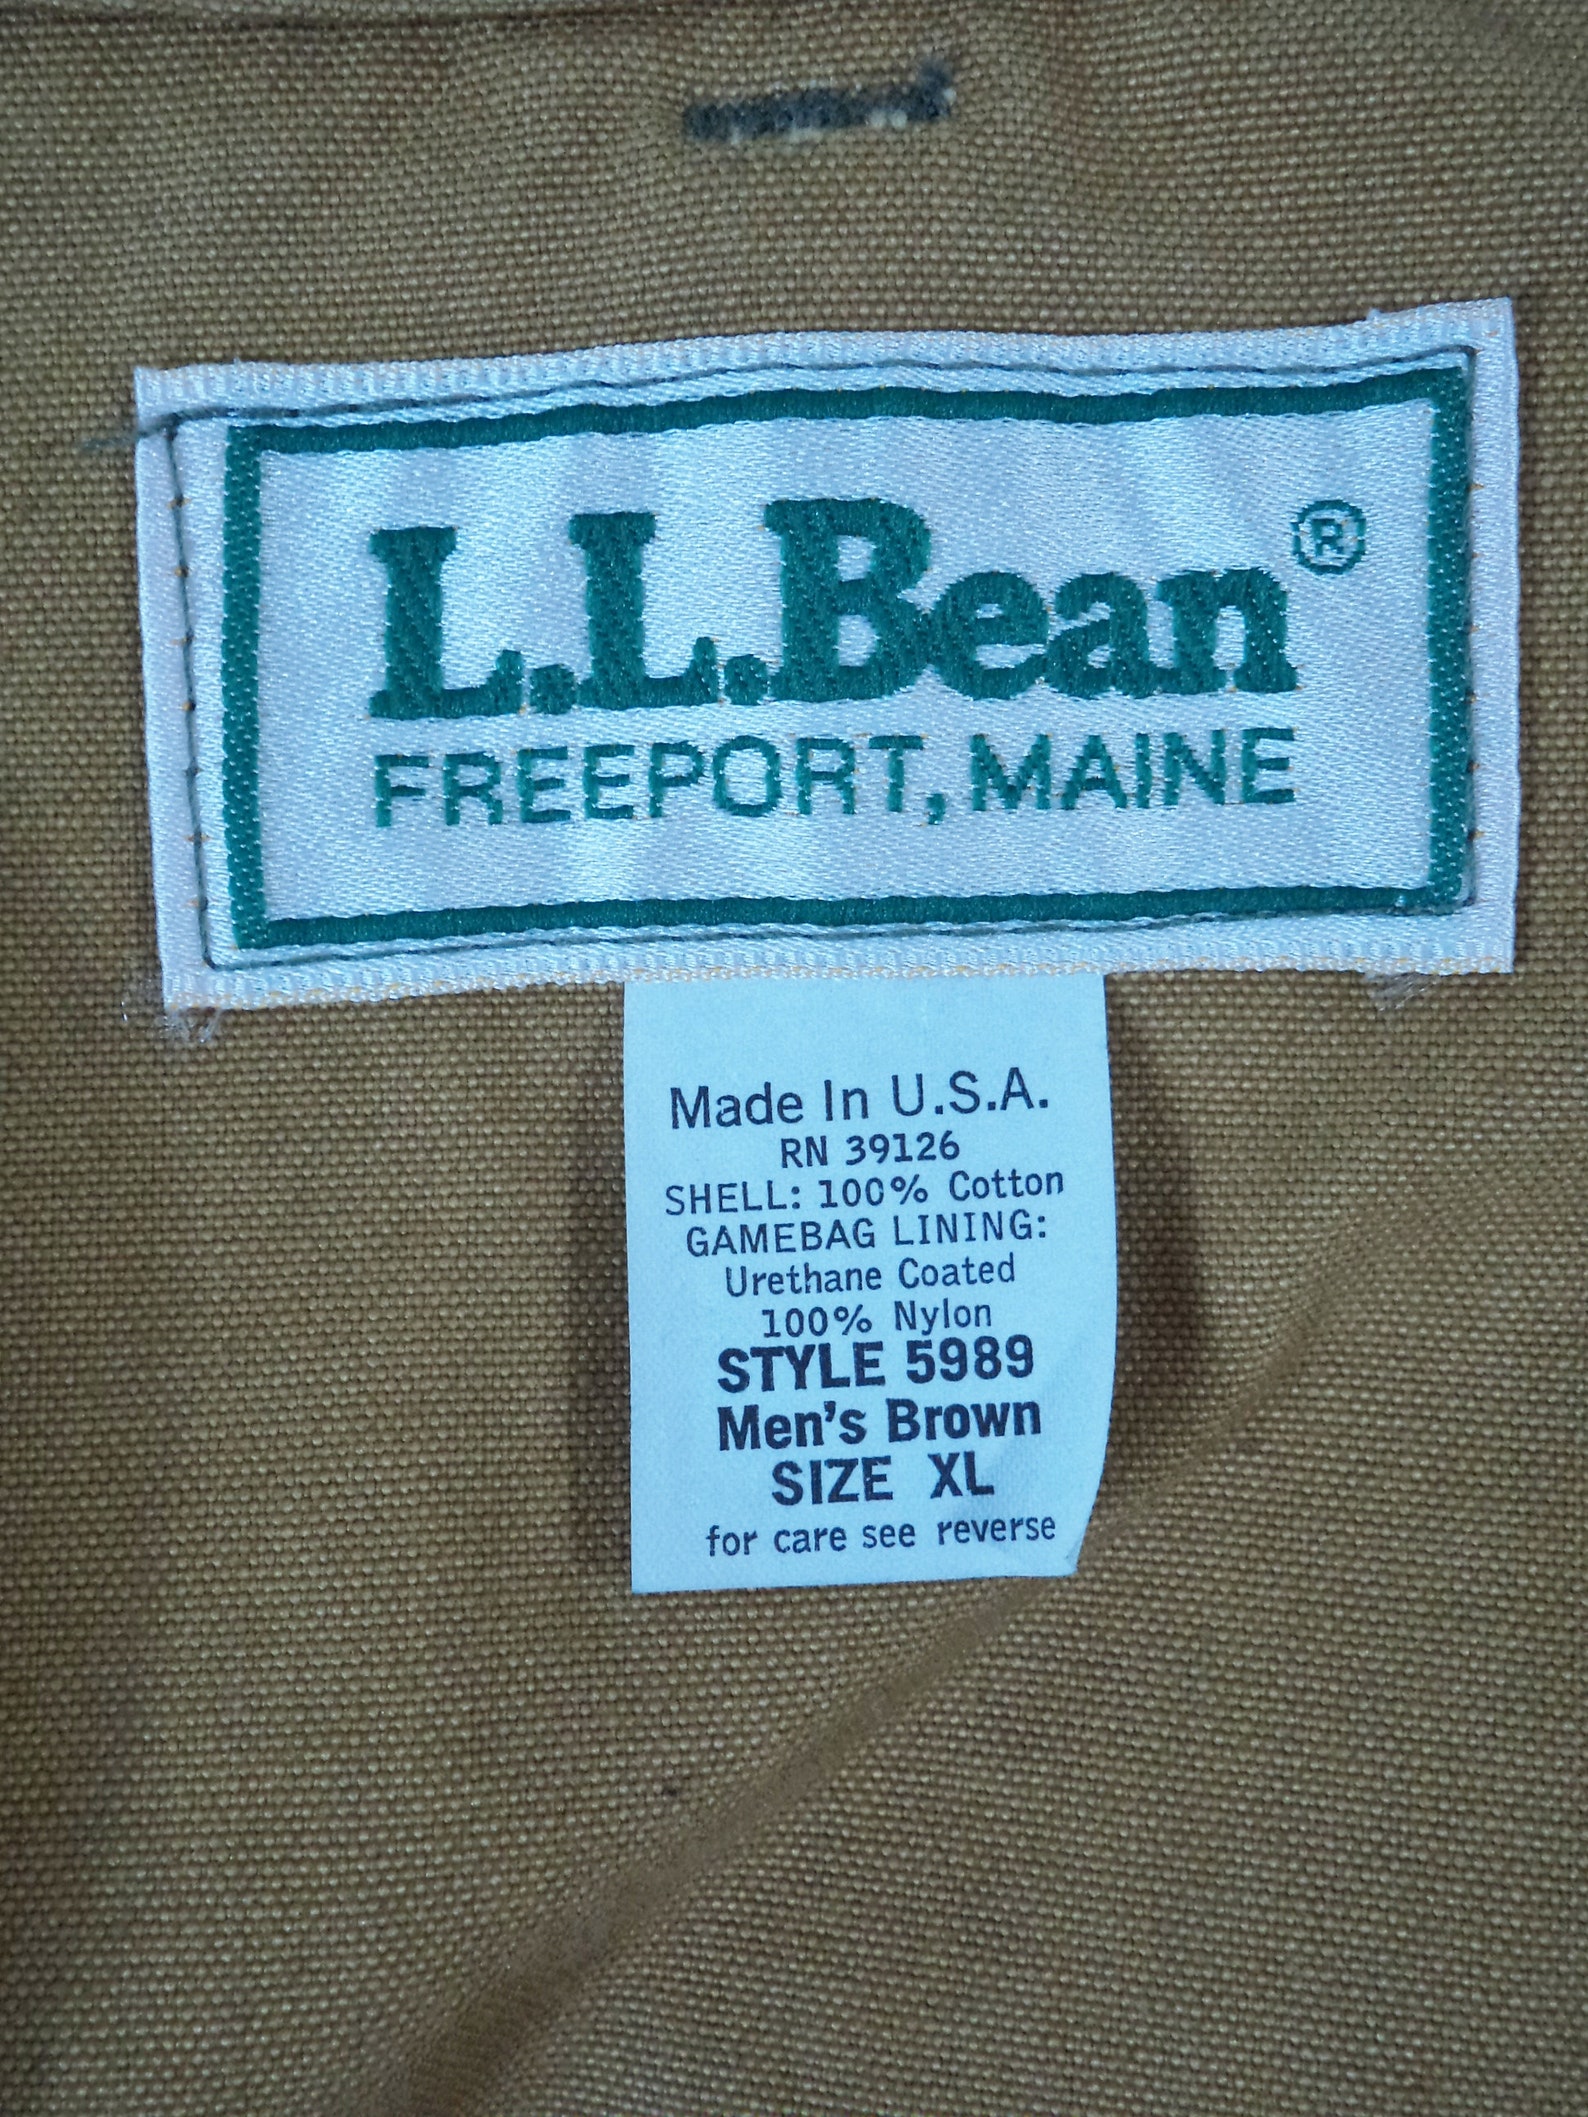 LL Bean 80s hunting vest usa made / Game bag pouch brown | Etsy